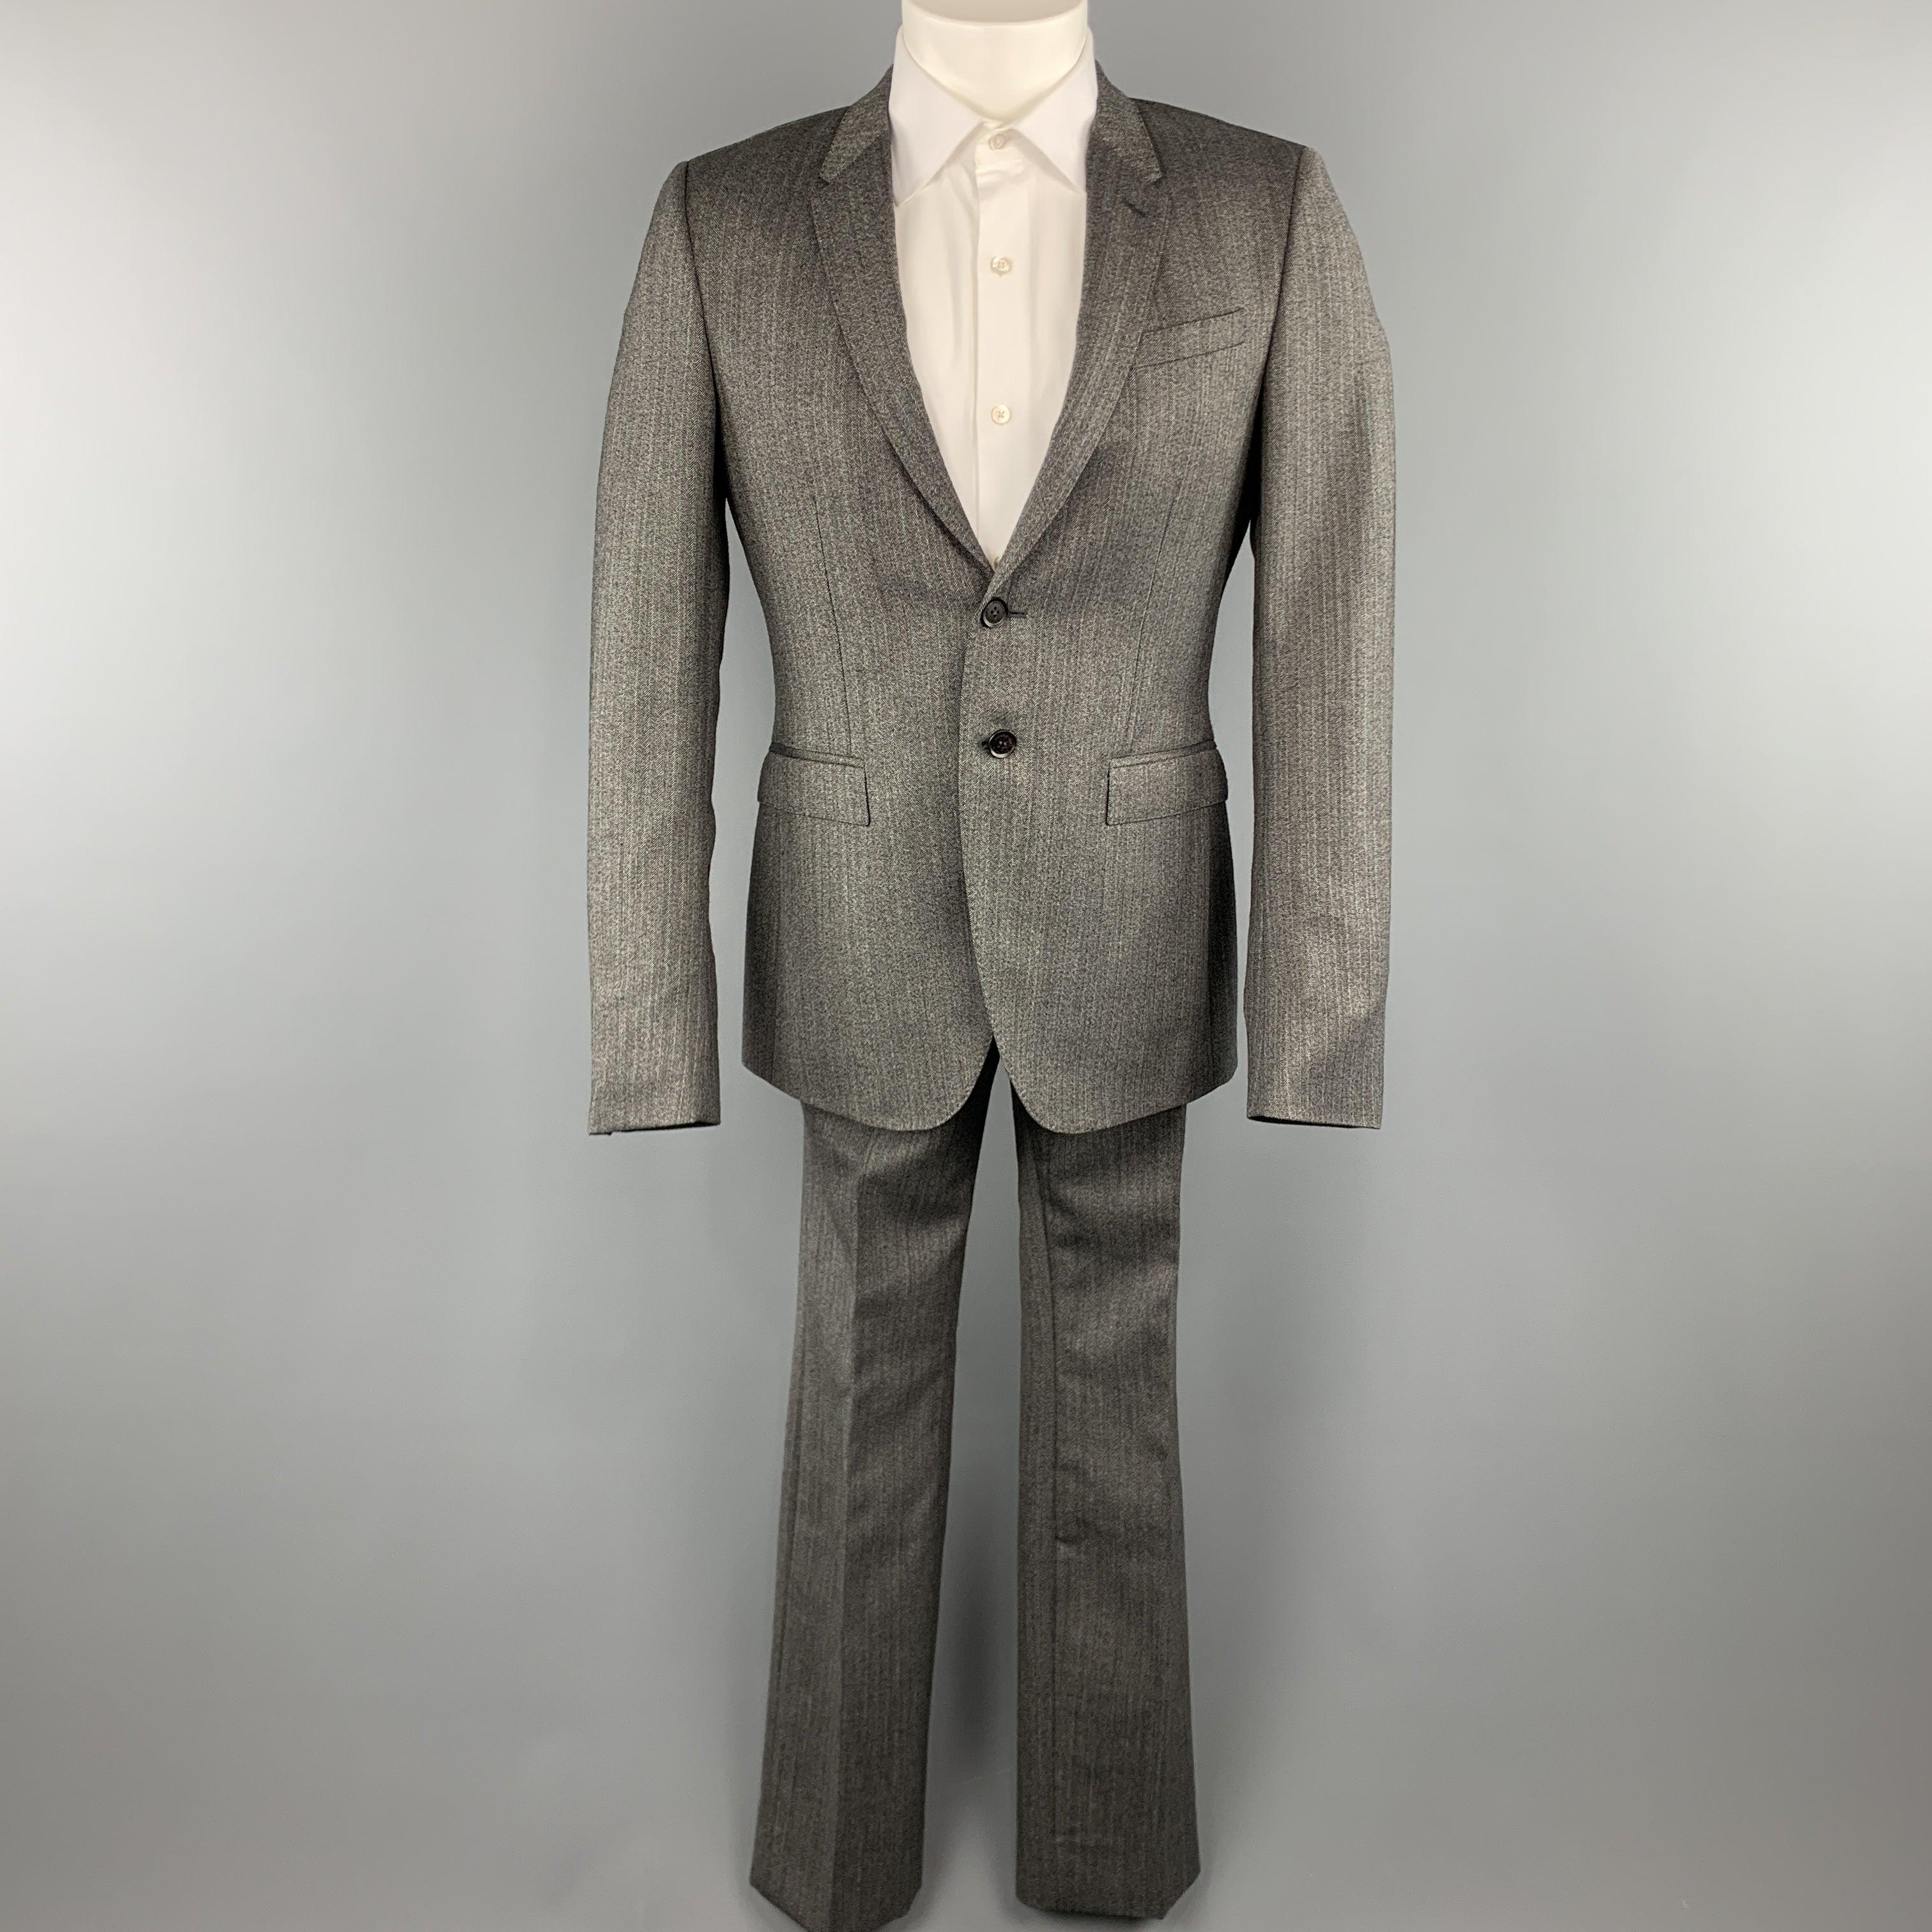 BURBERRY PRORSUM suit comes in a grey herringbone and includes a single breasted, two button sport coat with notch lapel and matching front trousers.
Excellent Pre-Owned Condition. 

Marked:   50 

Measurements: 
  -JacketShoulder: 16.5 inches